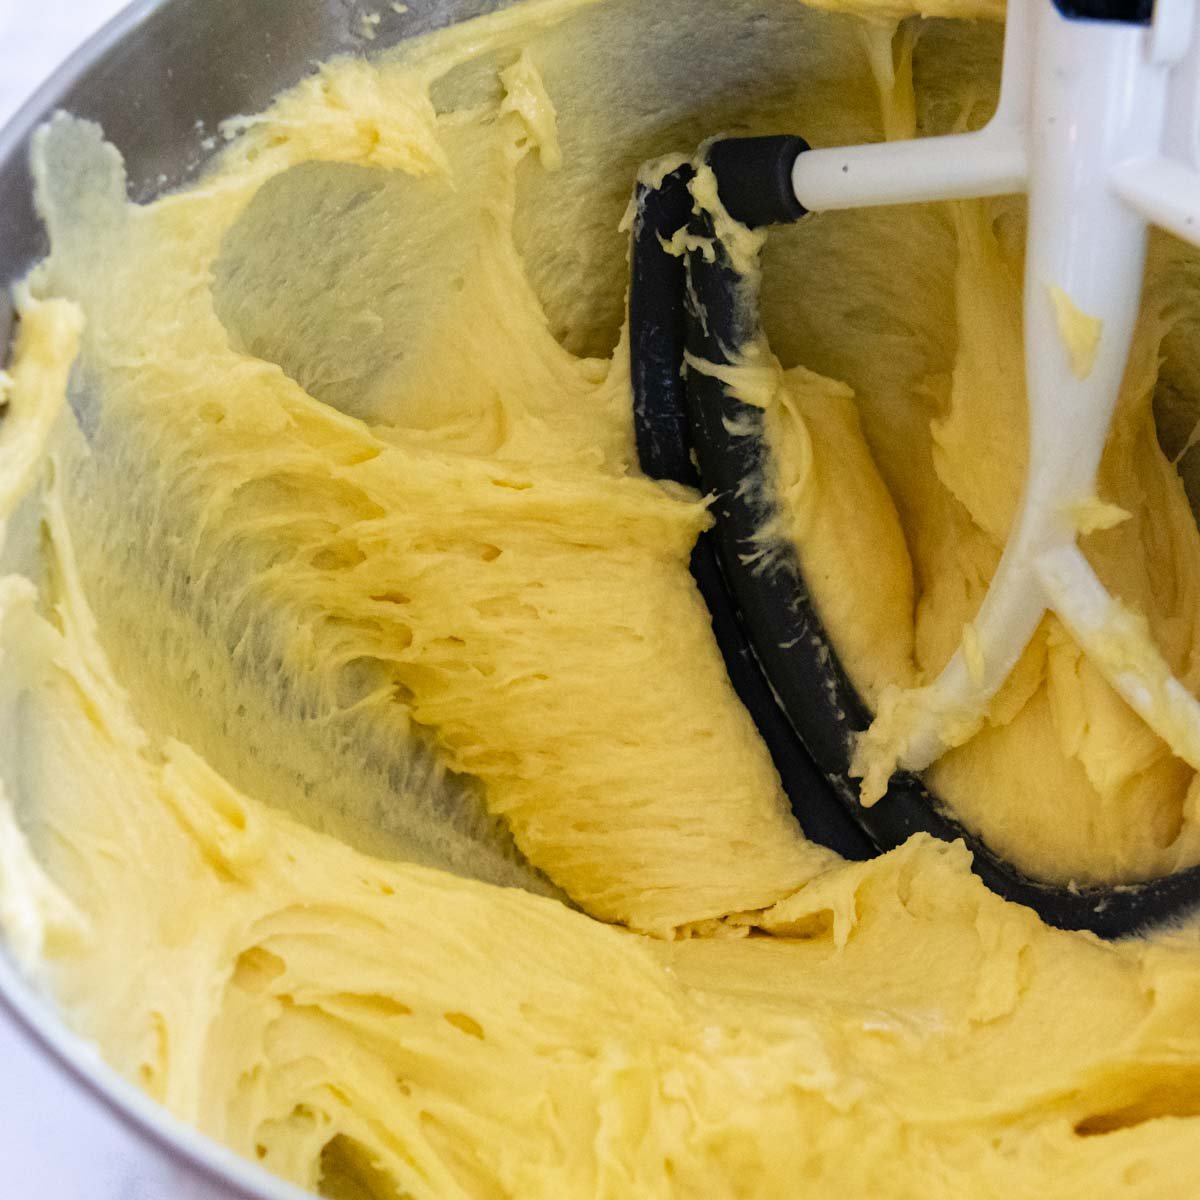 the lemon pound cake batter after mixing.